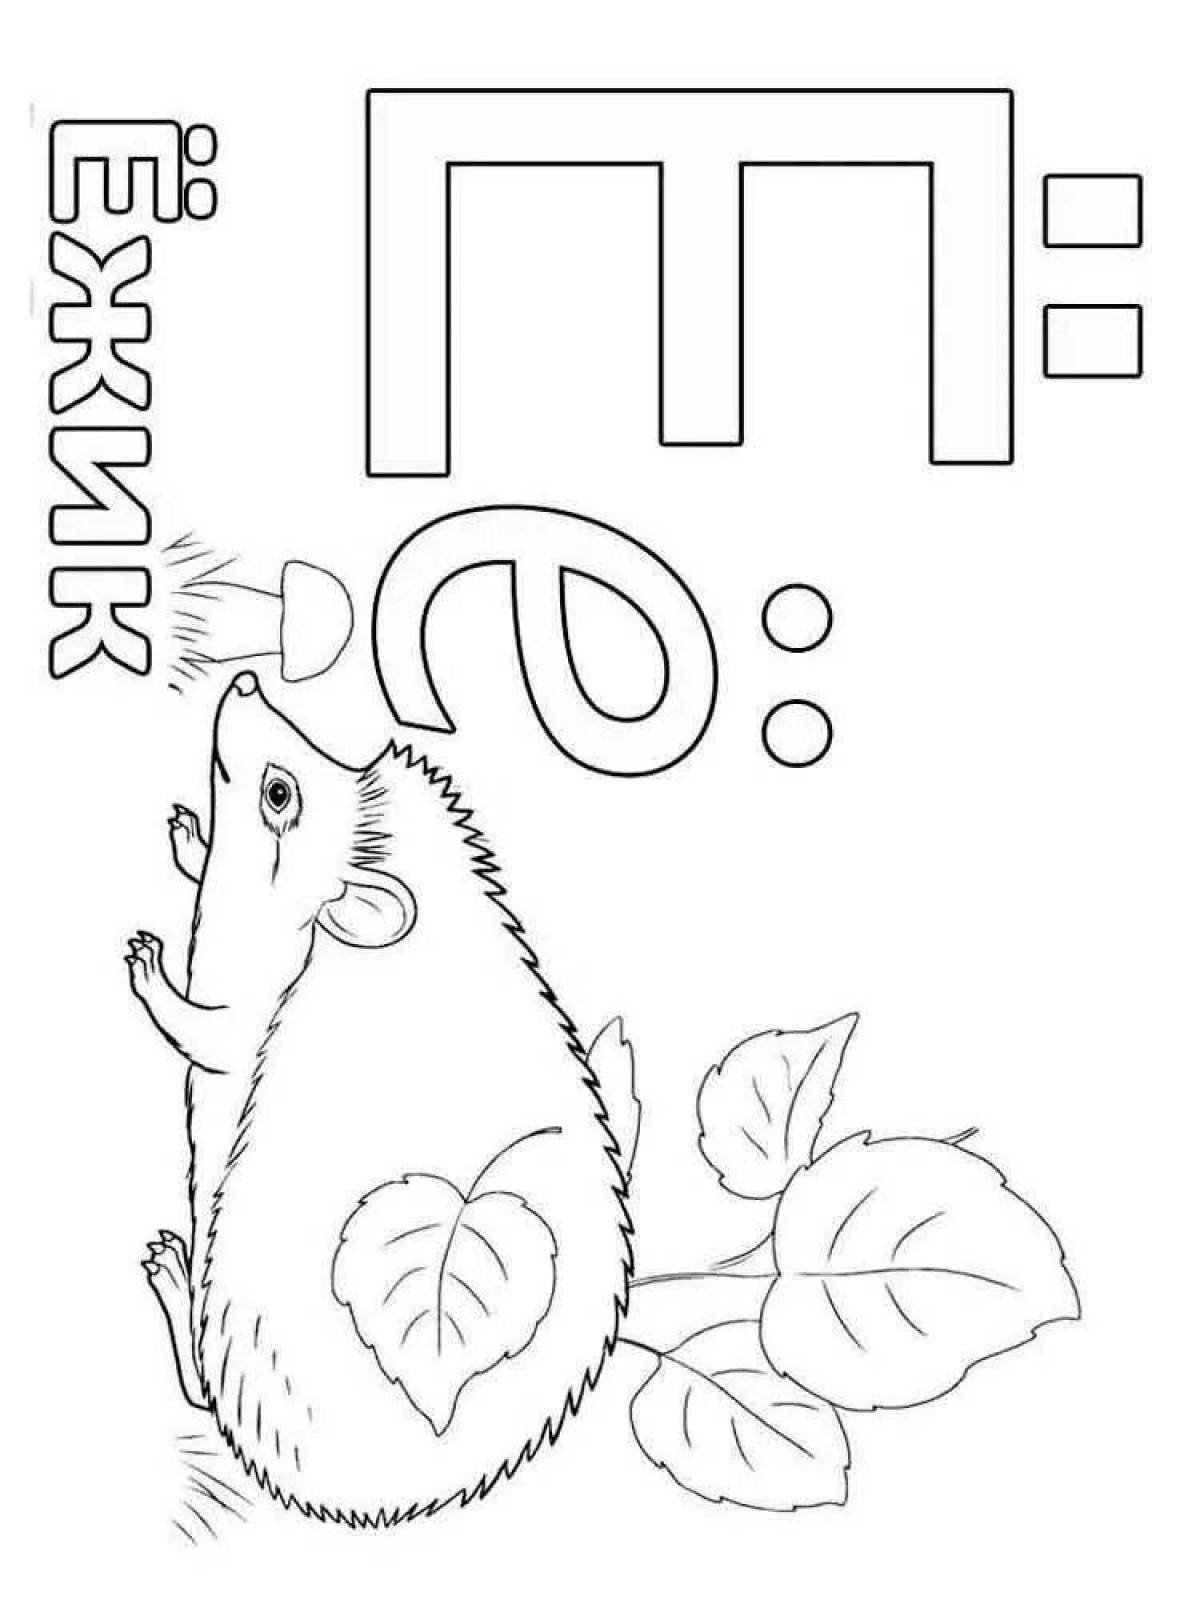 Colorful alphabet coloring page for 4-5 year olds